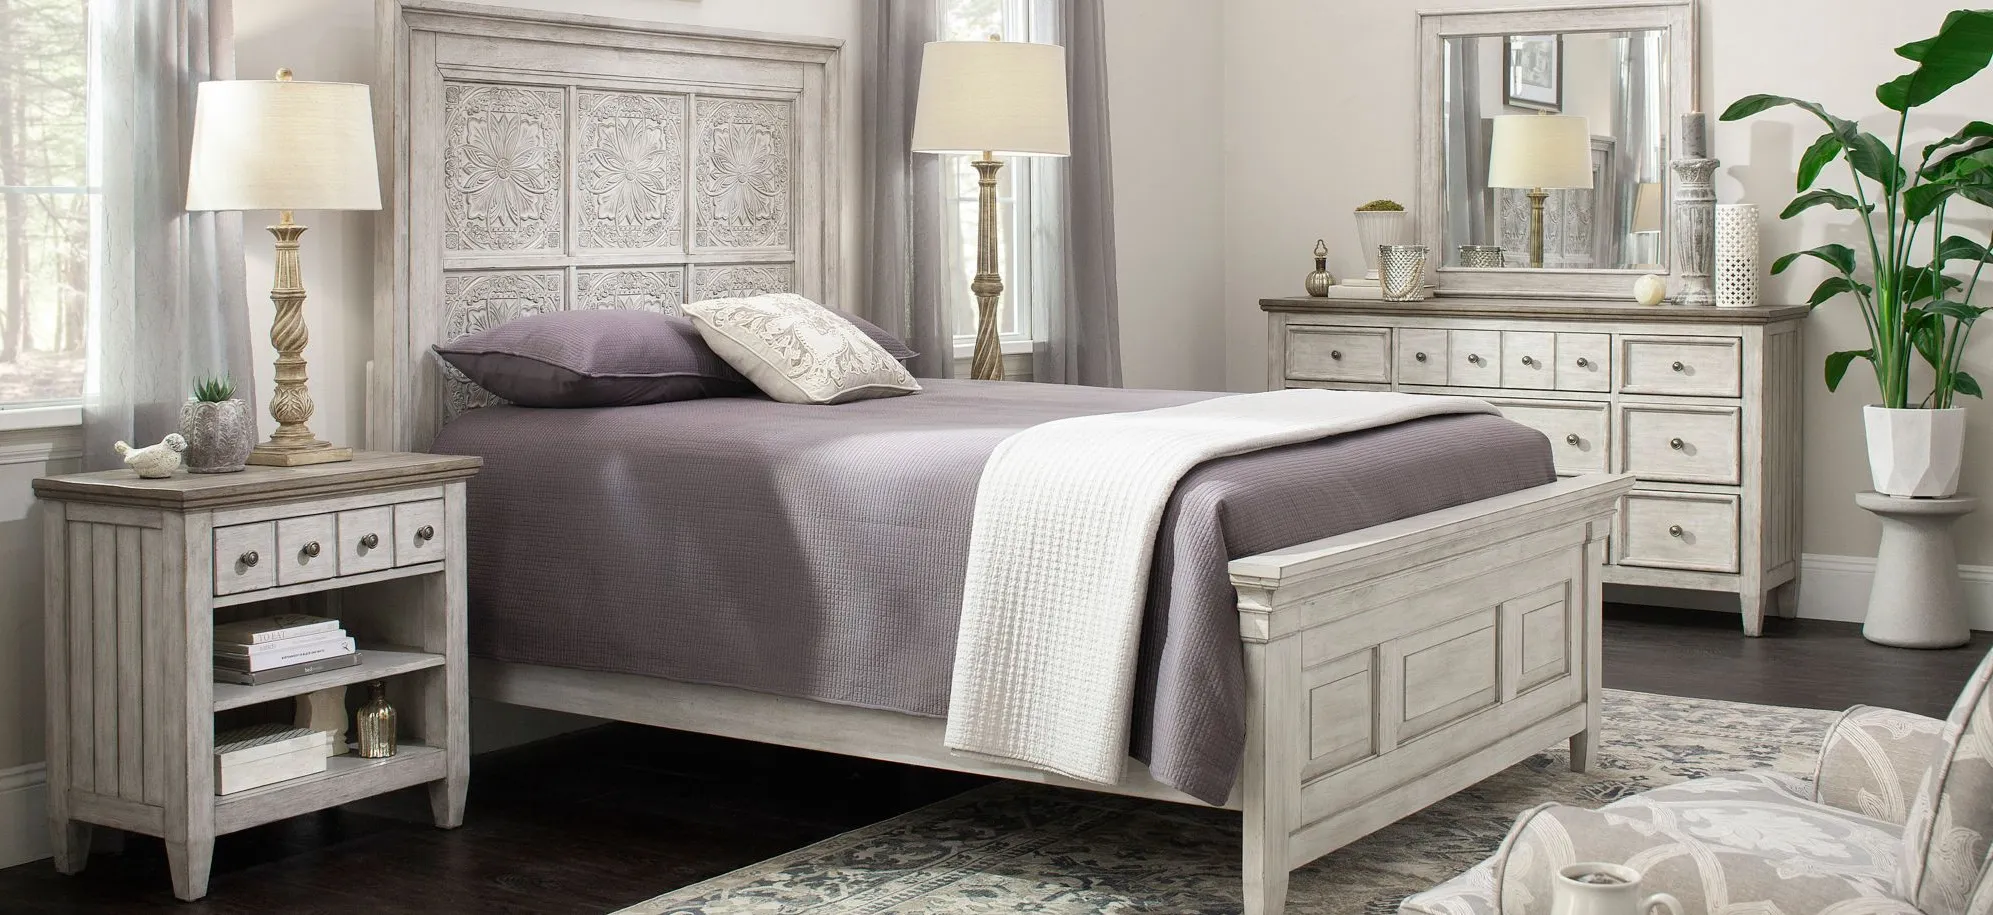 Magnolia Park 4-pc. Bedroom Set in White by Liberty Furniture